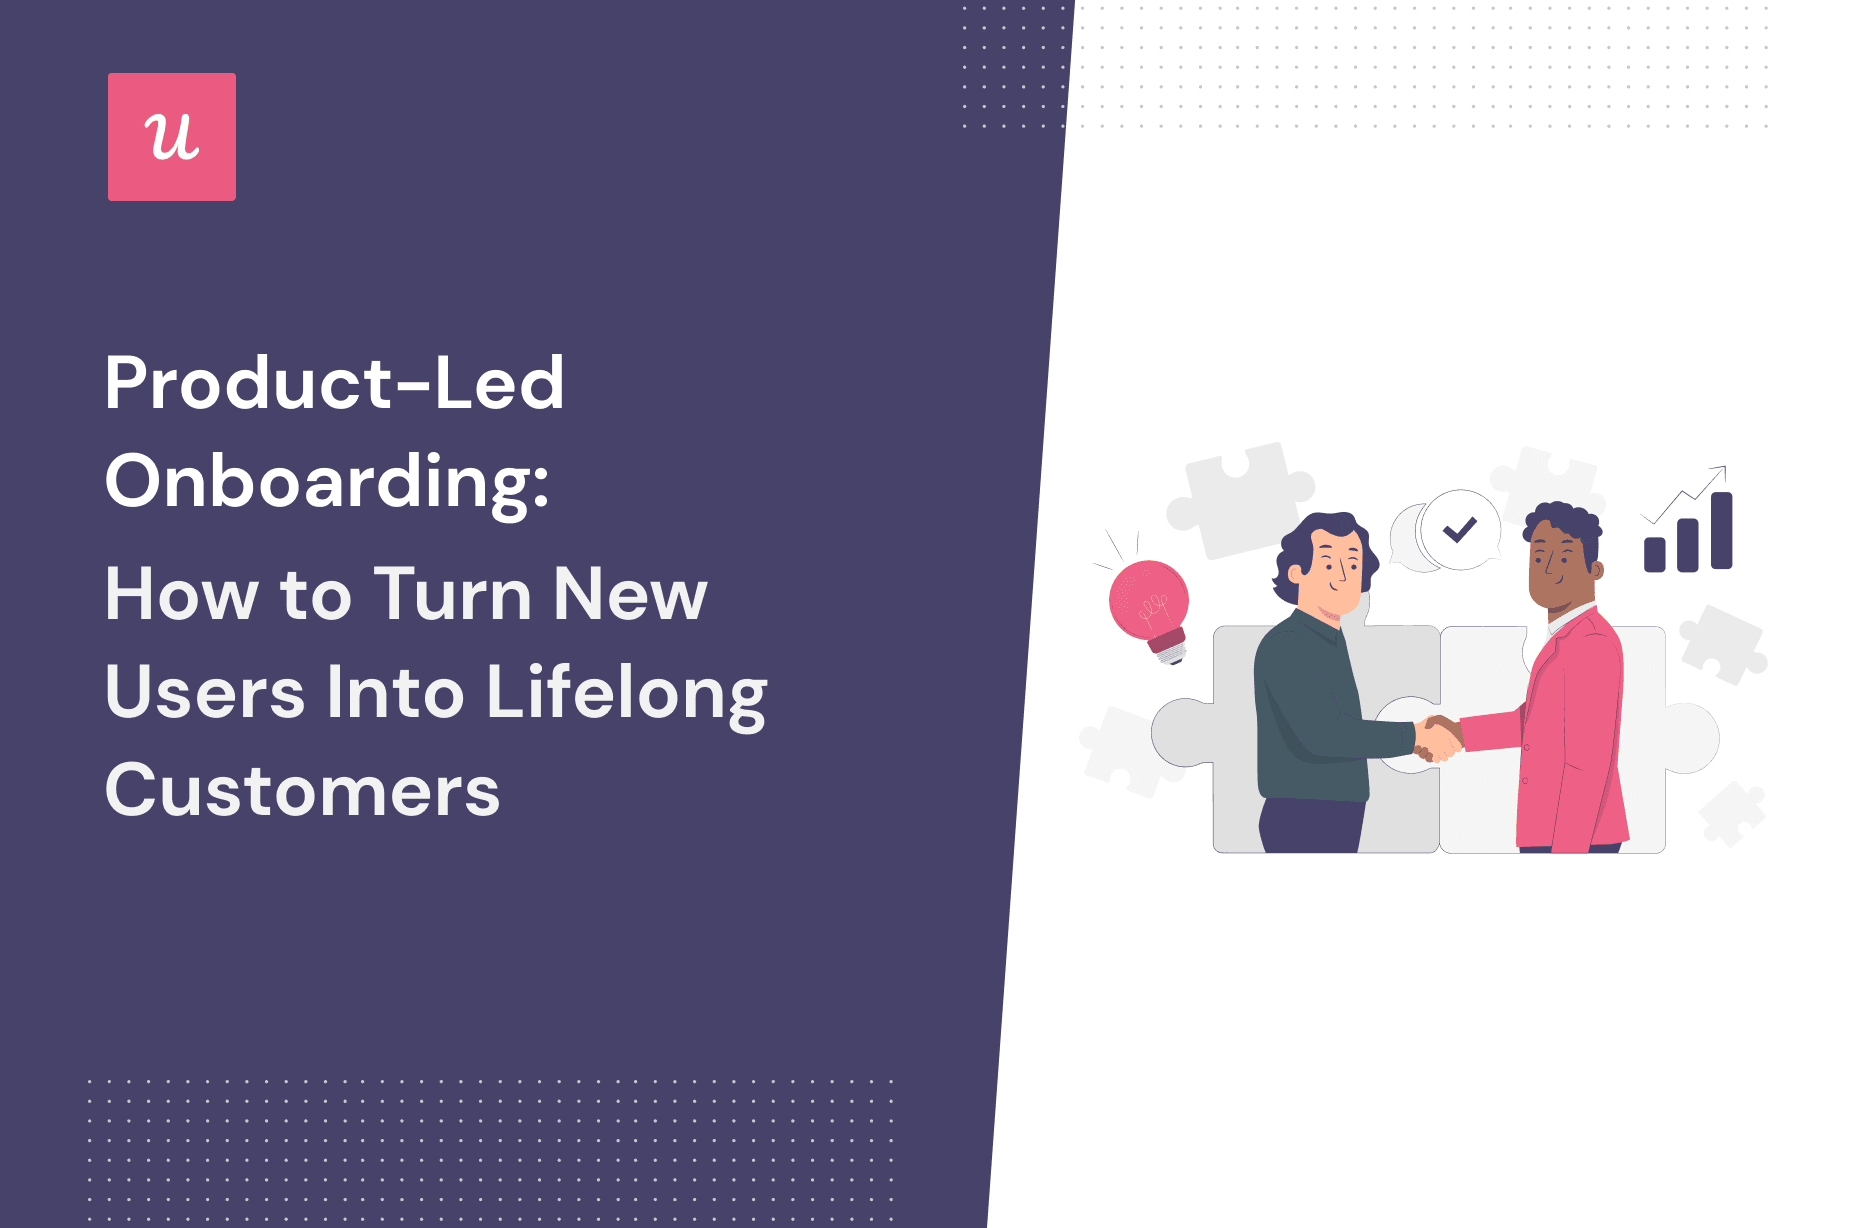 Product-led Onboarding: How to Turn New Users Into Lifelong Customers